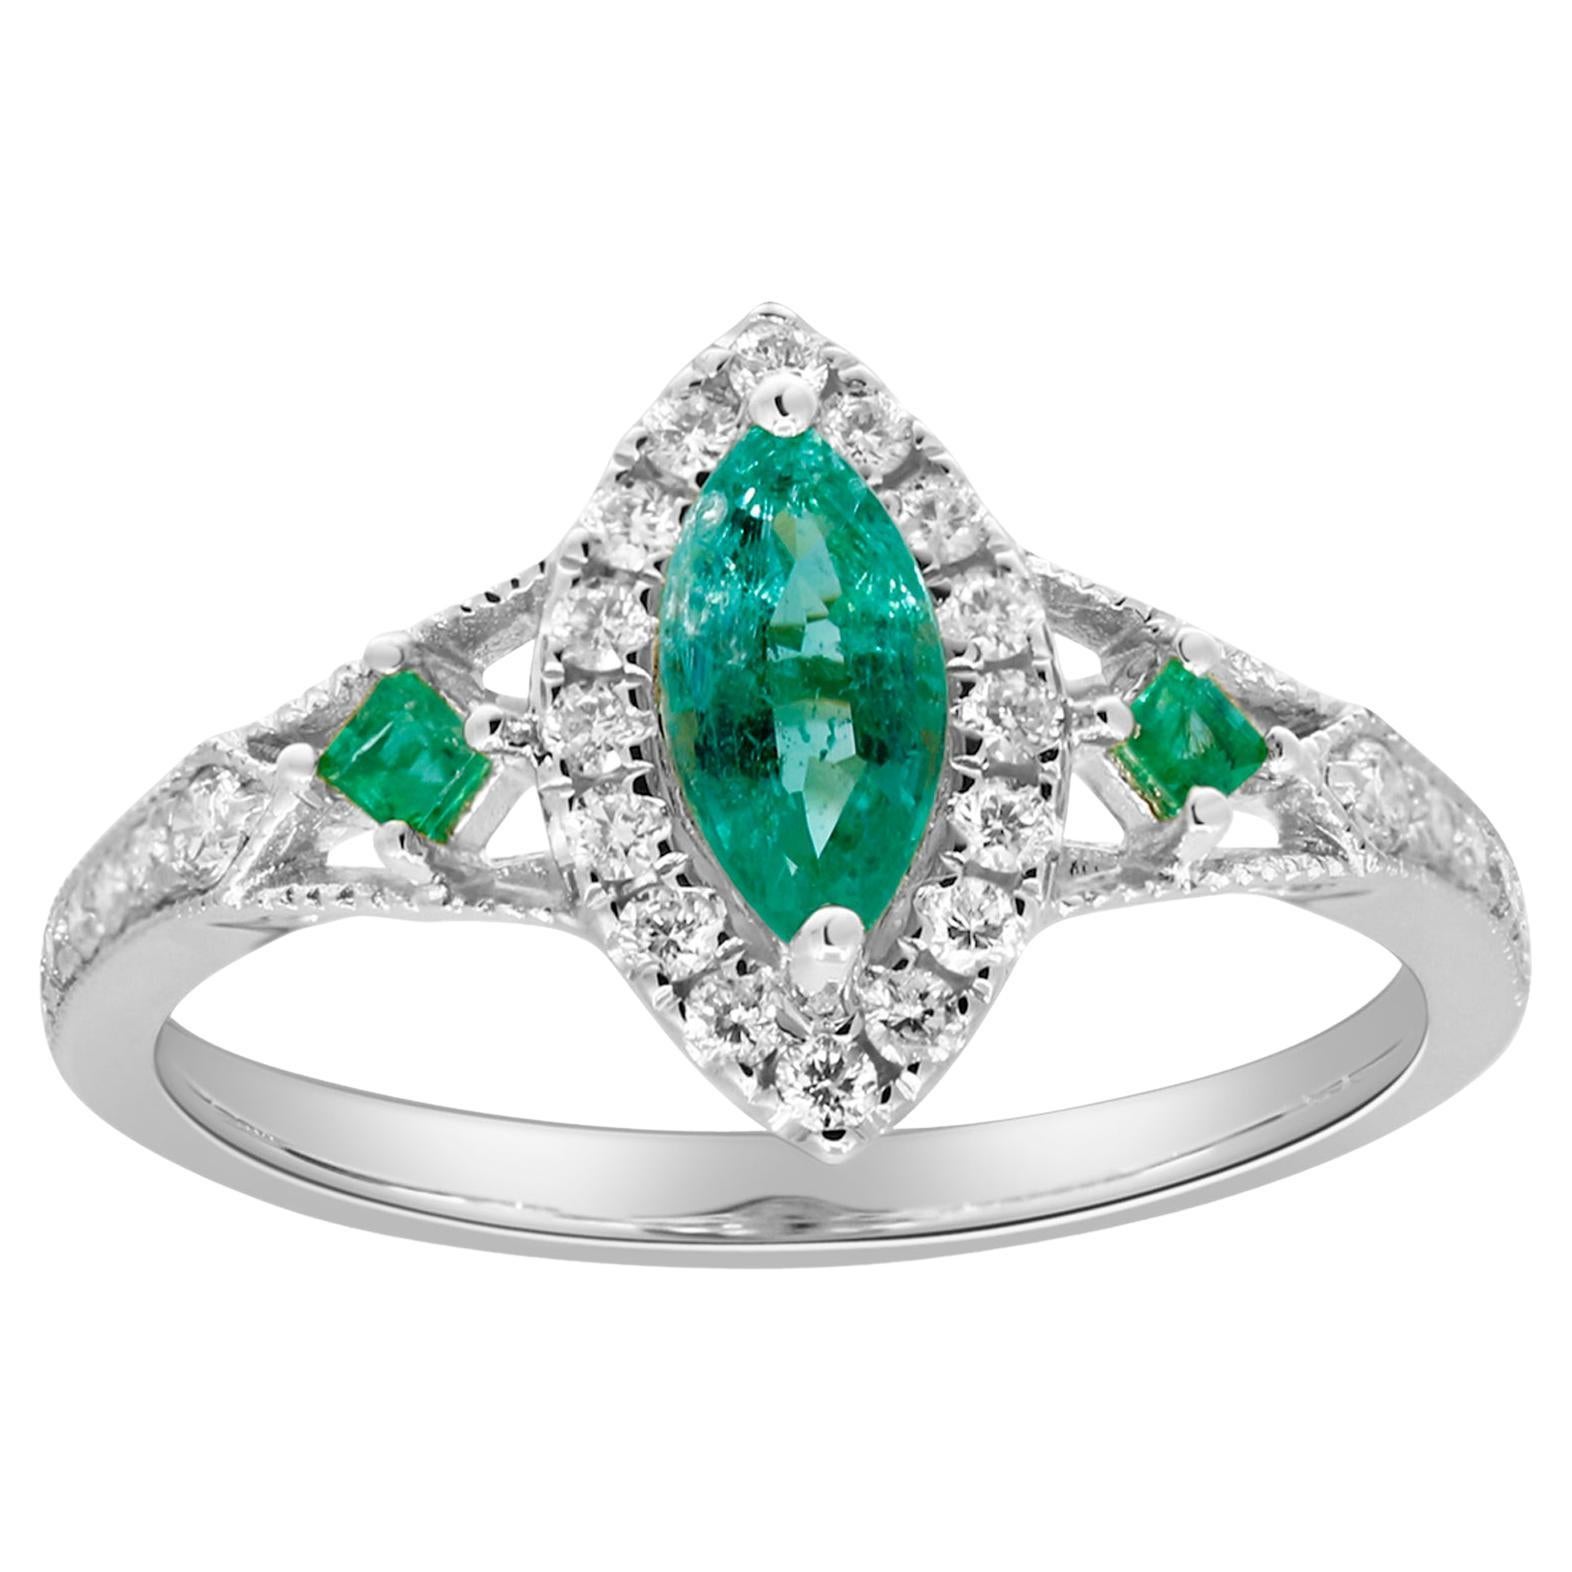 0.61 Carat Marquise and 0.12 Carat Square Emerald Diamond Accents 14KW Gold Ring For Sale